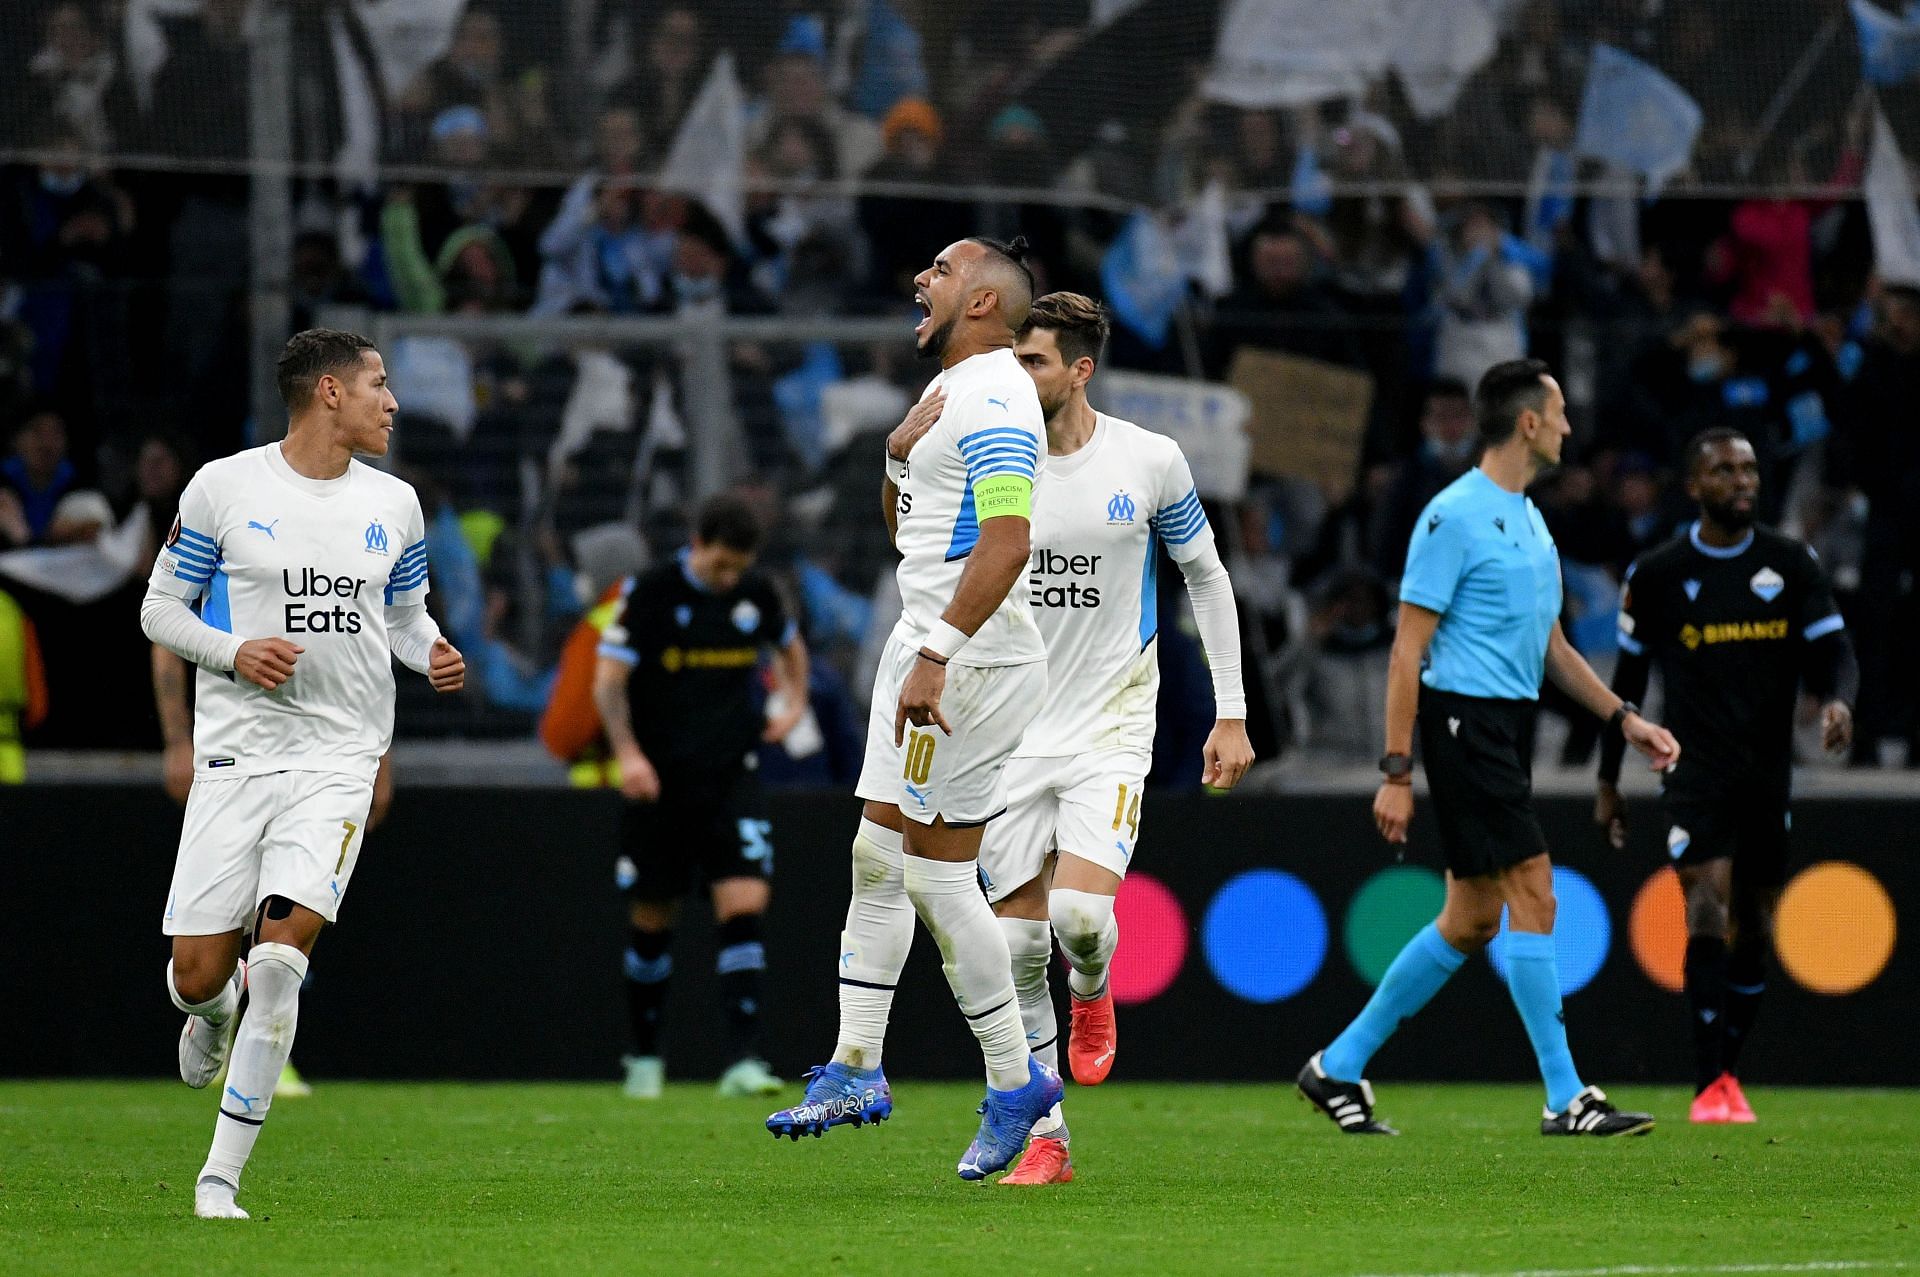 Olympique Marseille and Olympique Lyon square off in a Ligue 1 fixture on Tuesday